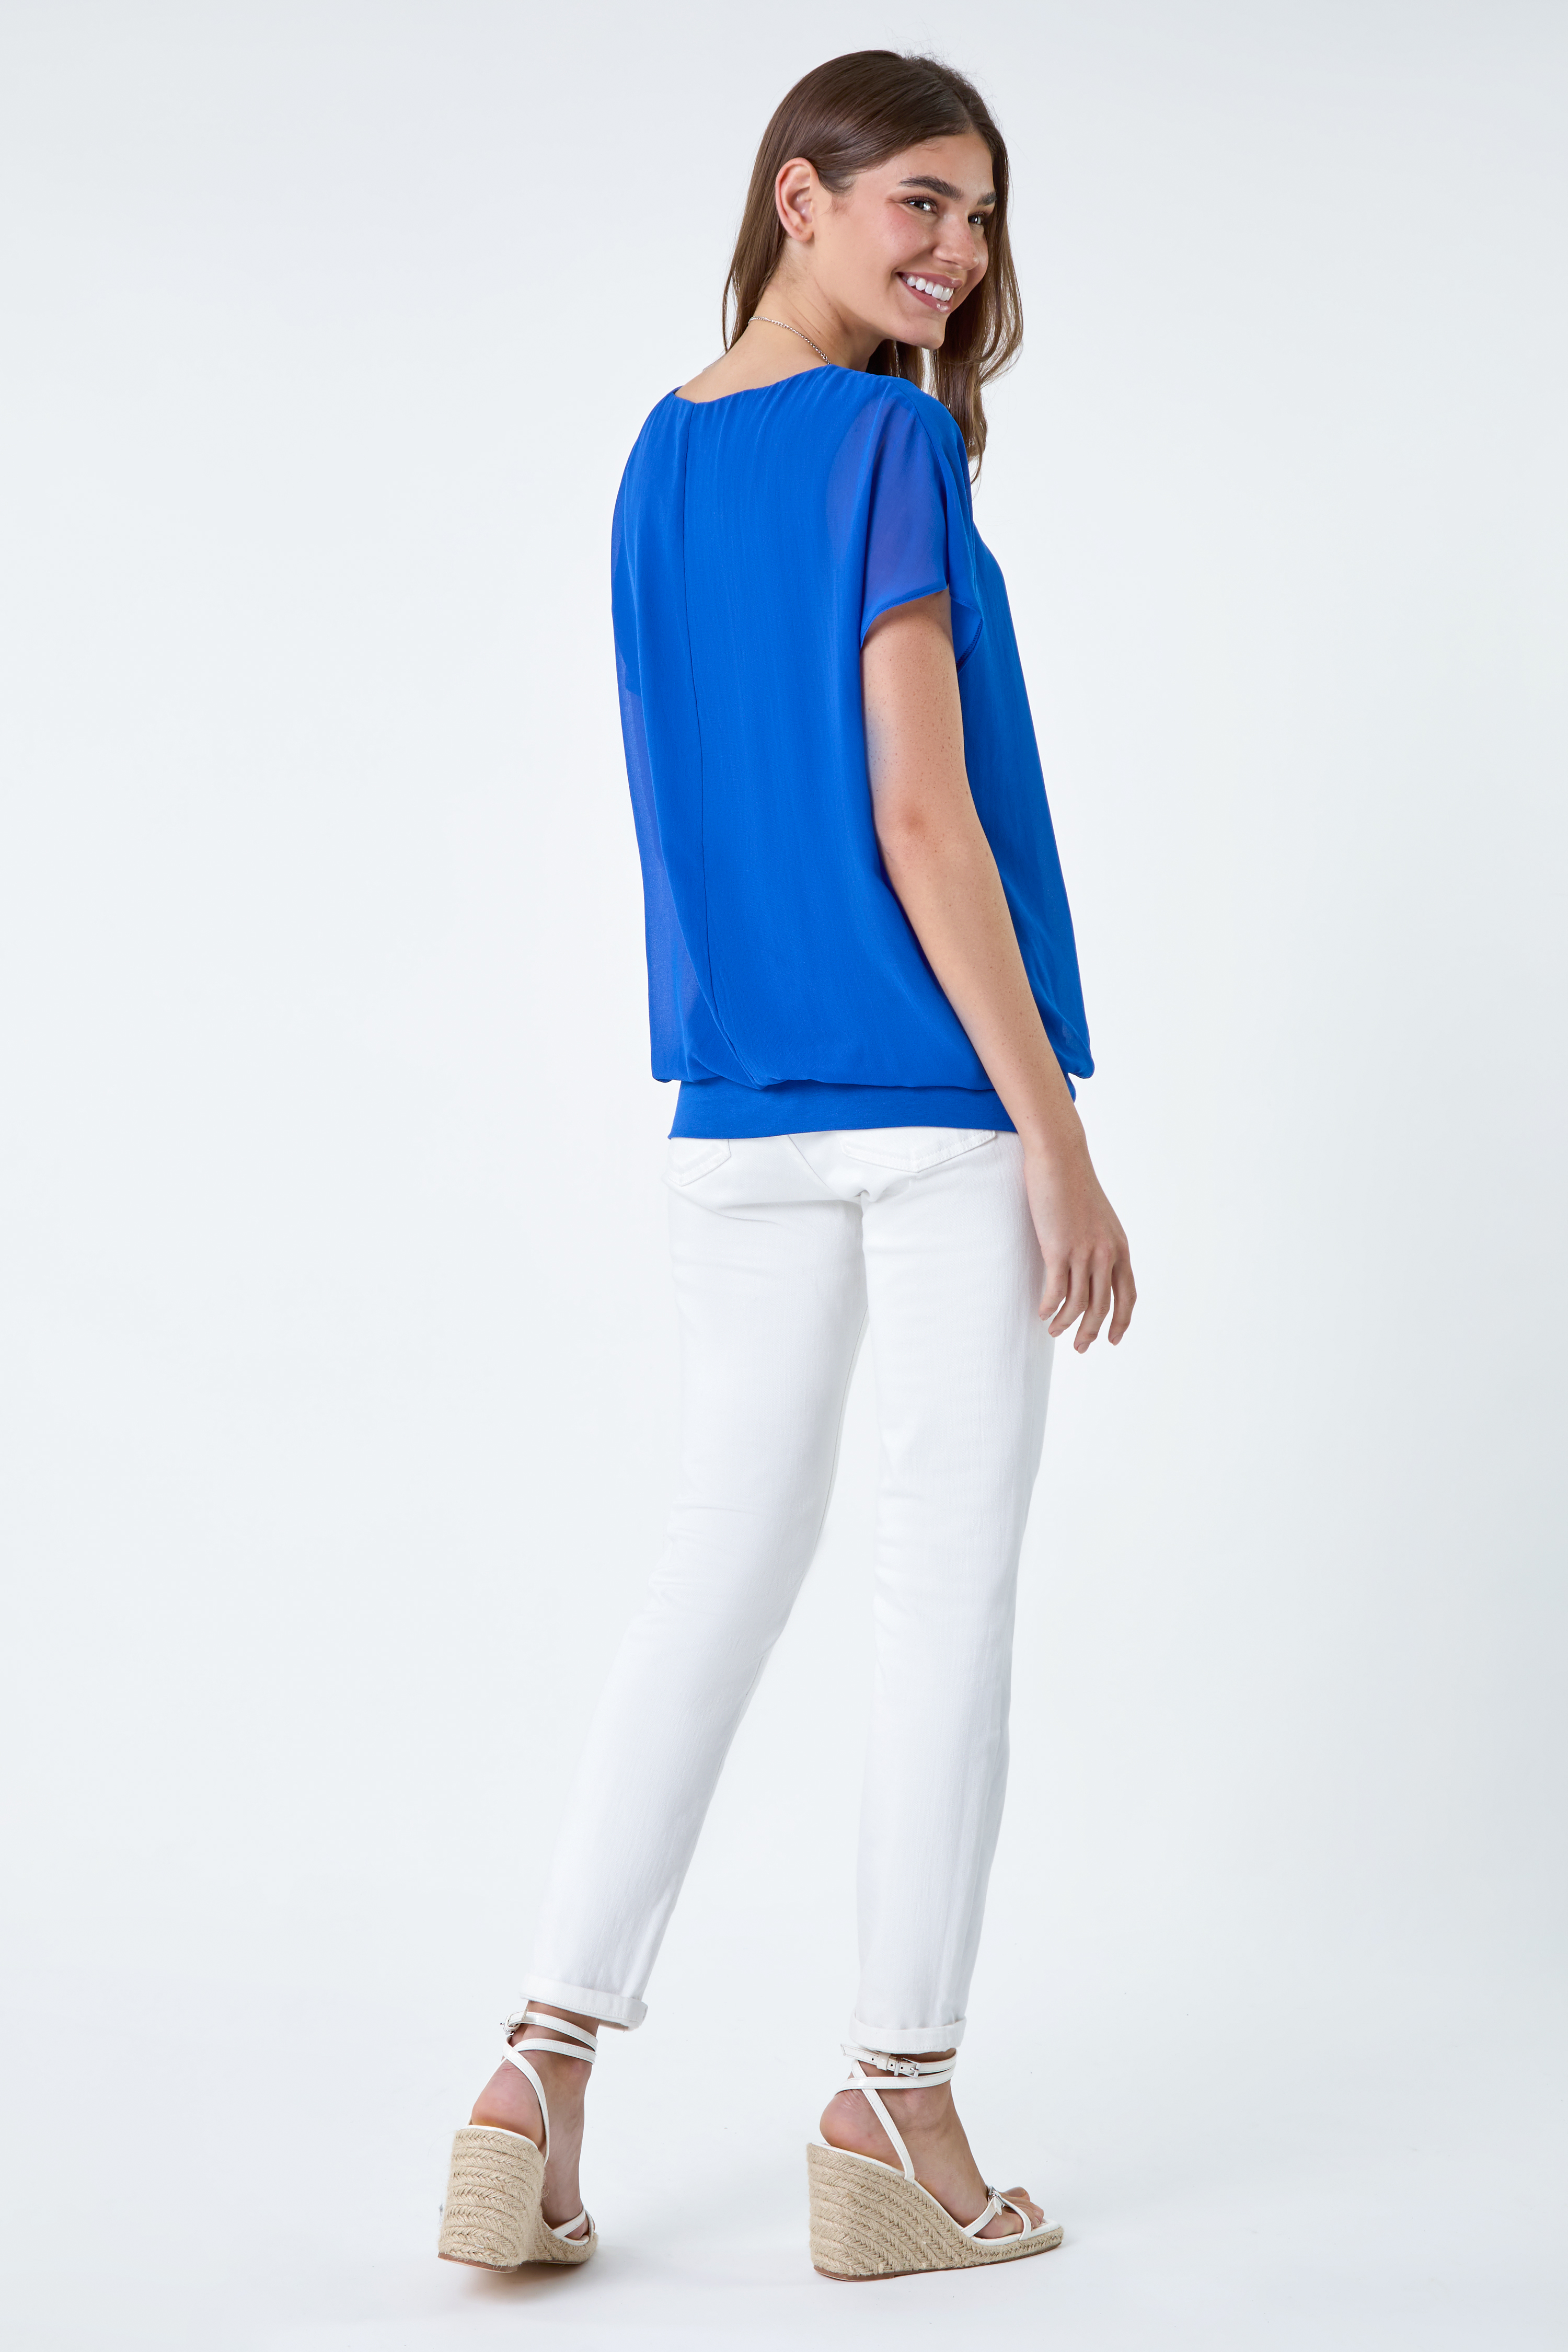 Royal Blue Chiffon Jersey Blouson Top with Necklace, Image 3 of 5